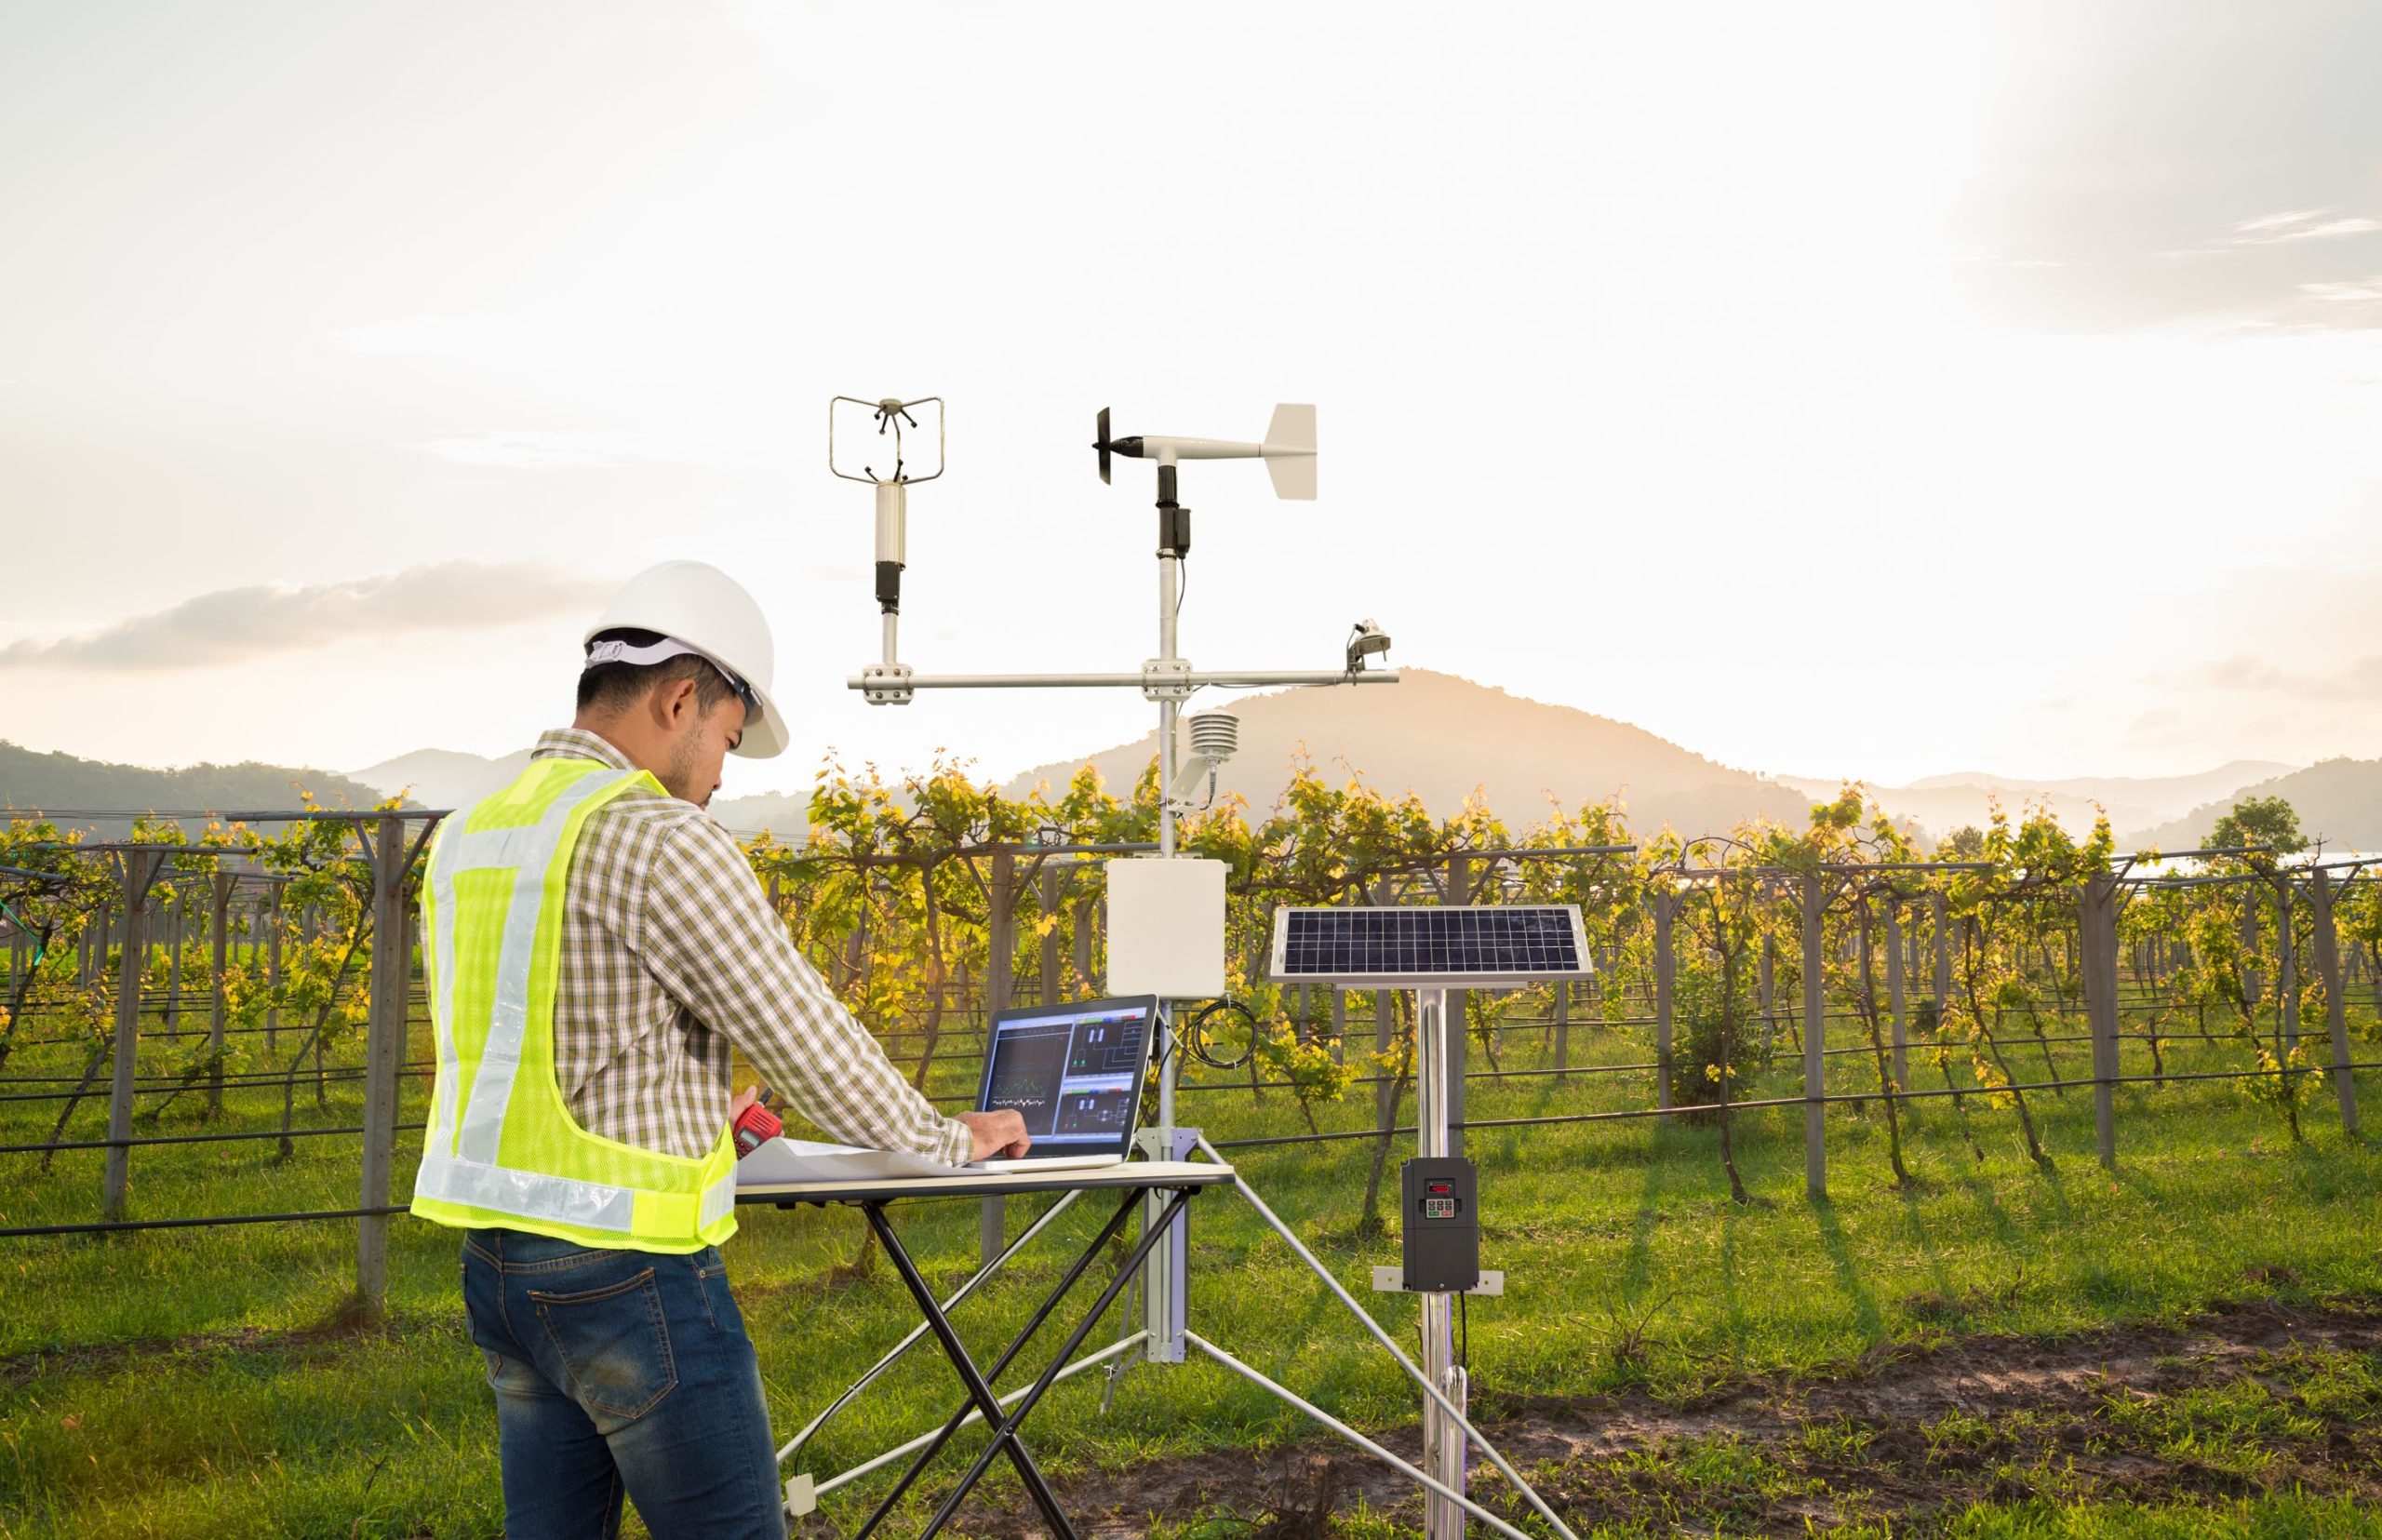 CASE STUDY: Weather Station reporting